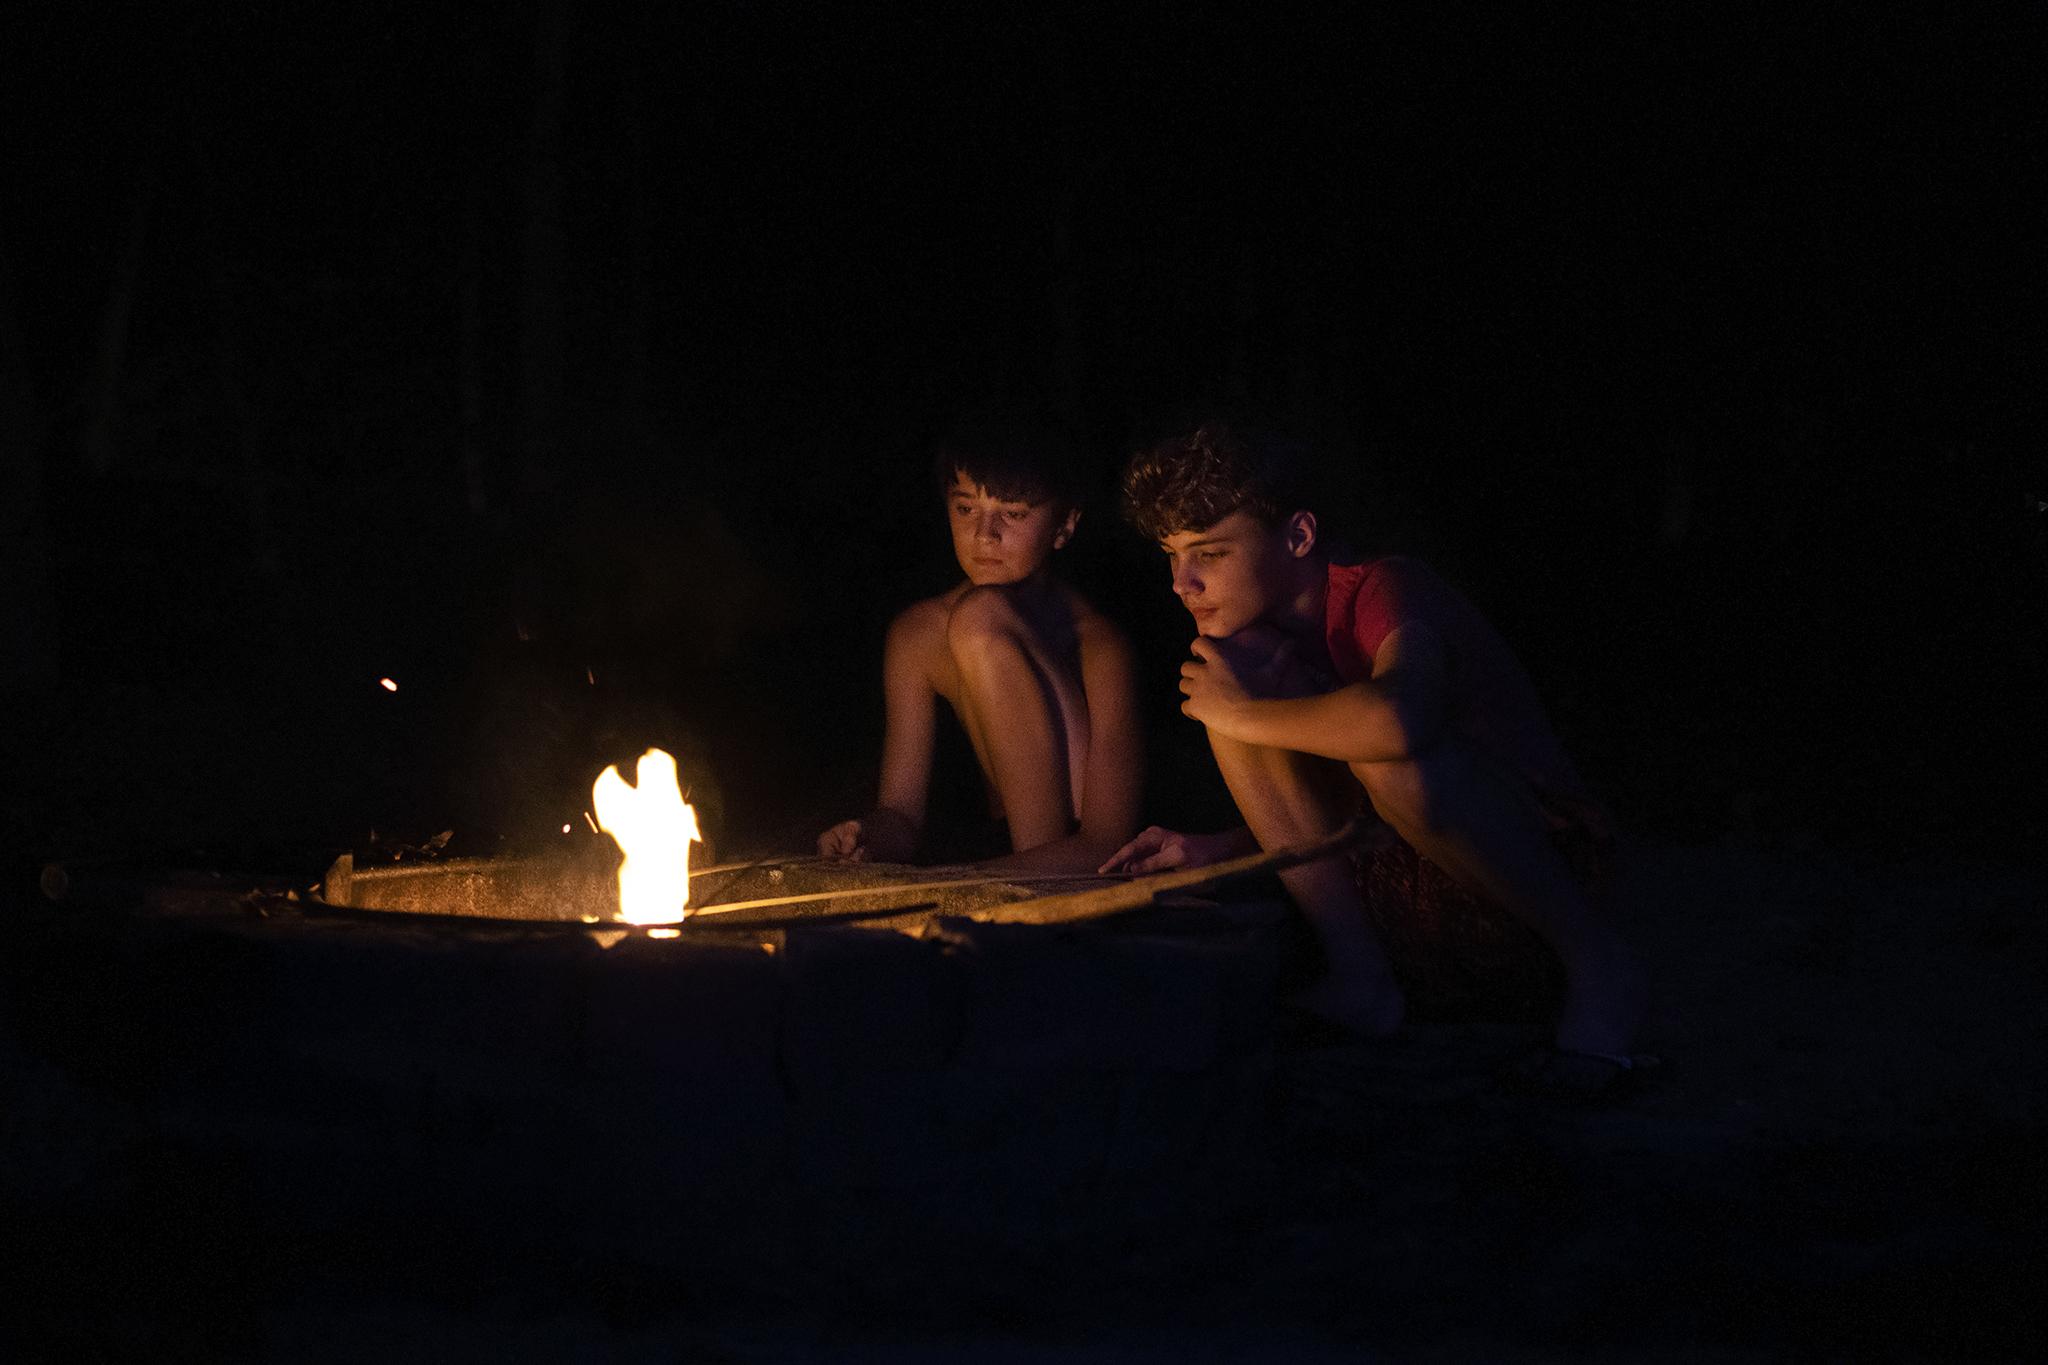 Growing Up - Two friends tend to the campfire they started during a...